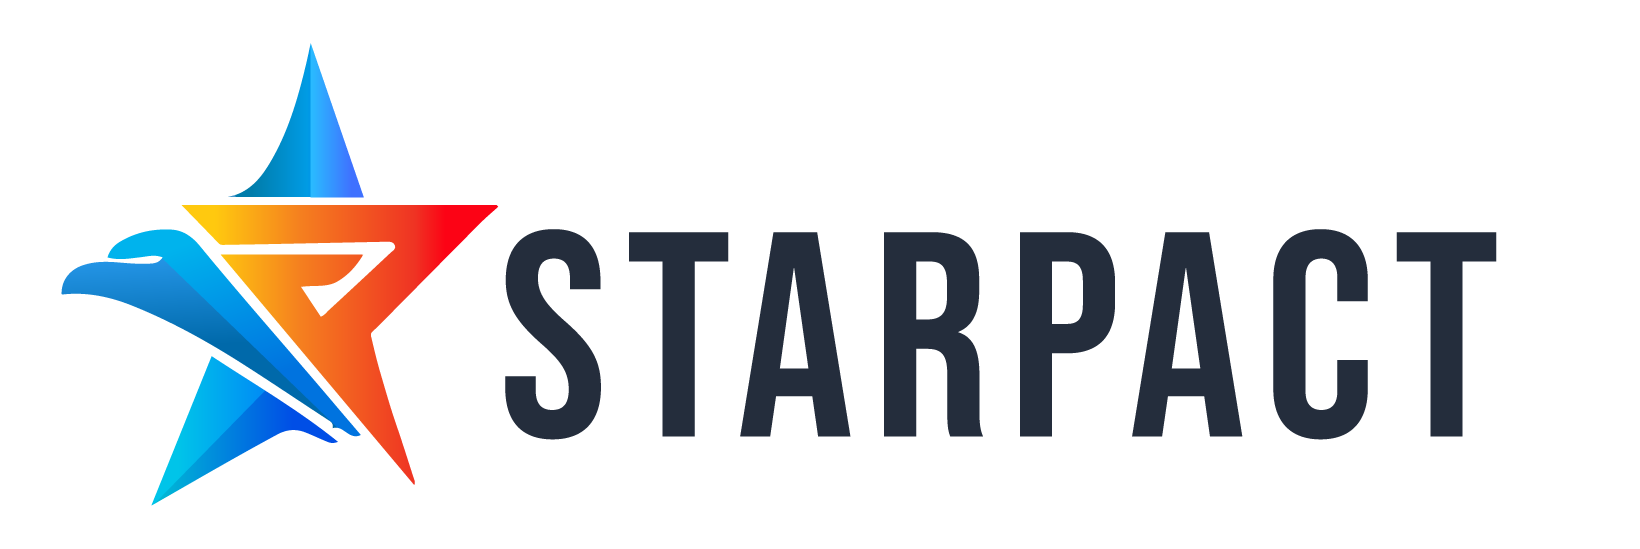 Starpact Global Services